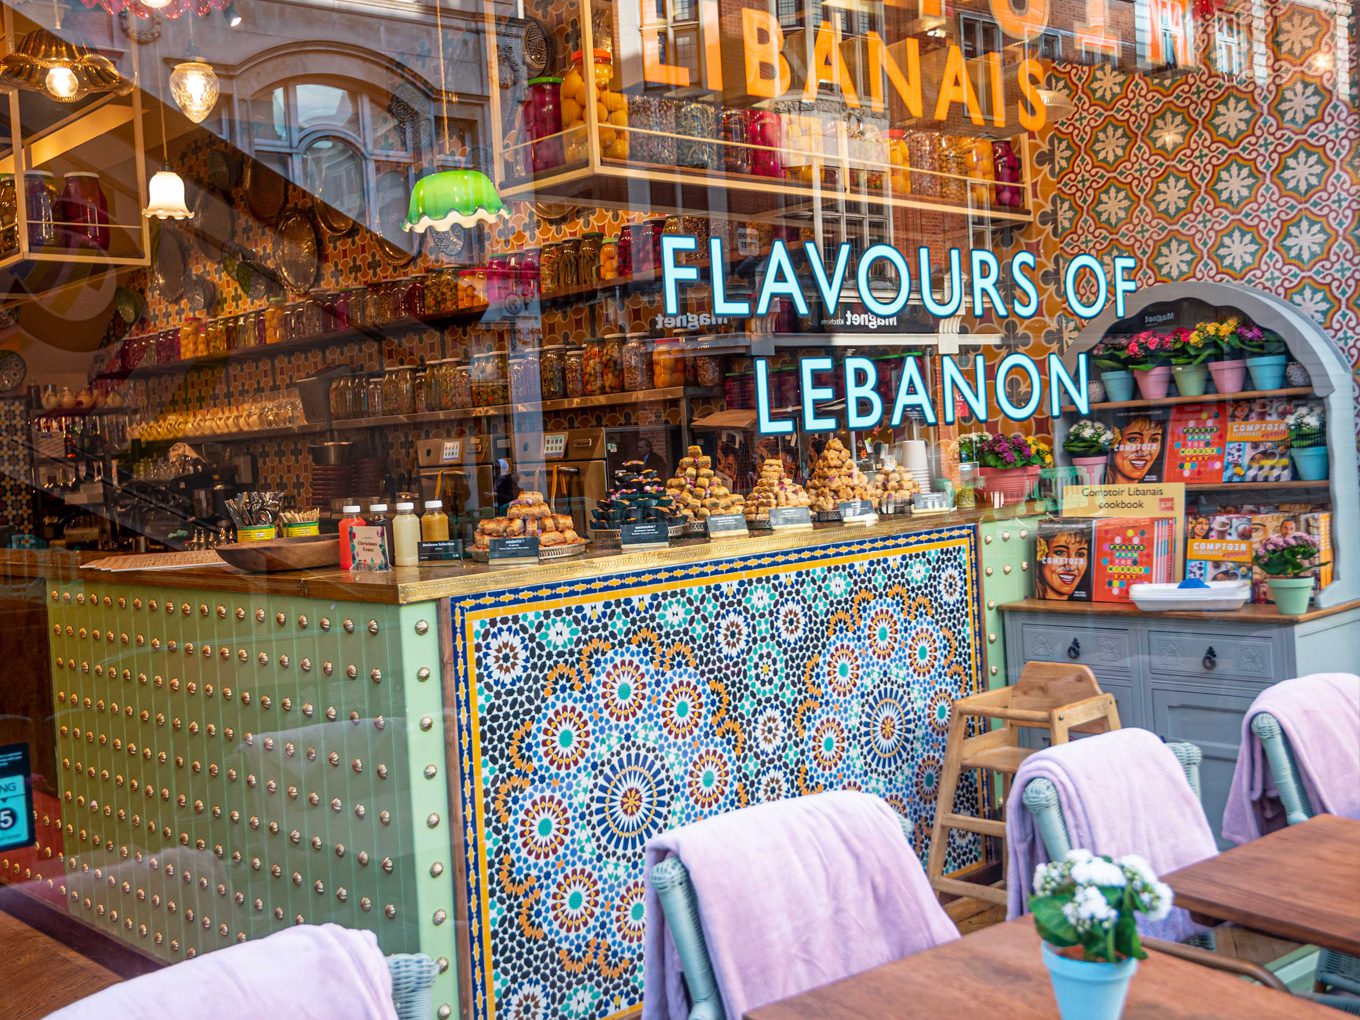 window with flavours of lebanon sign